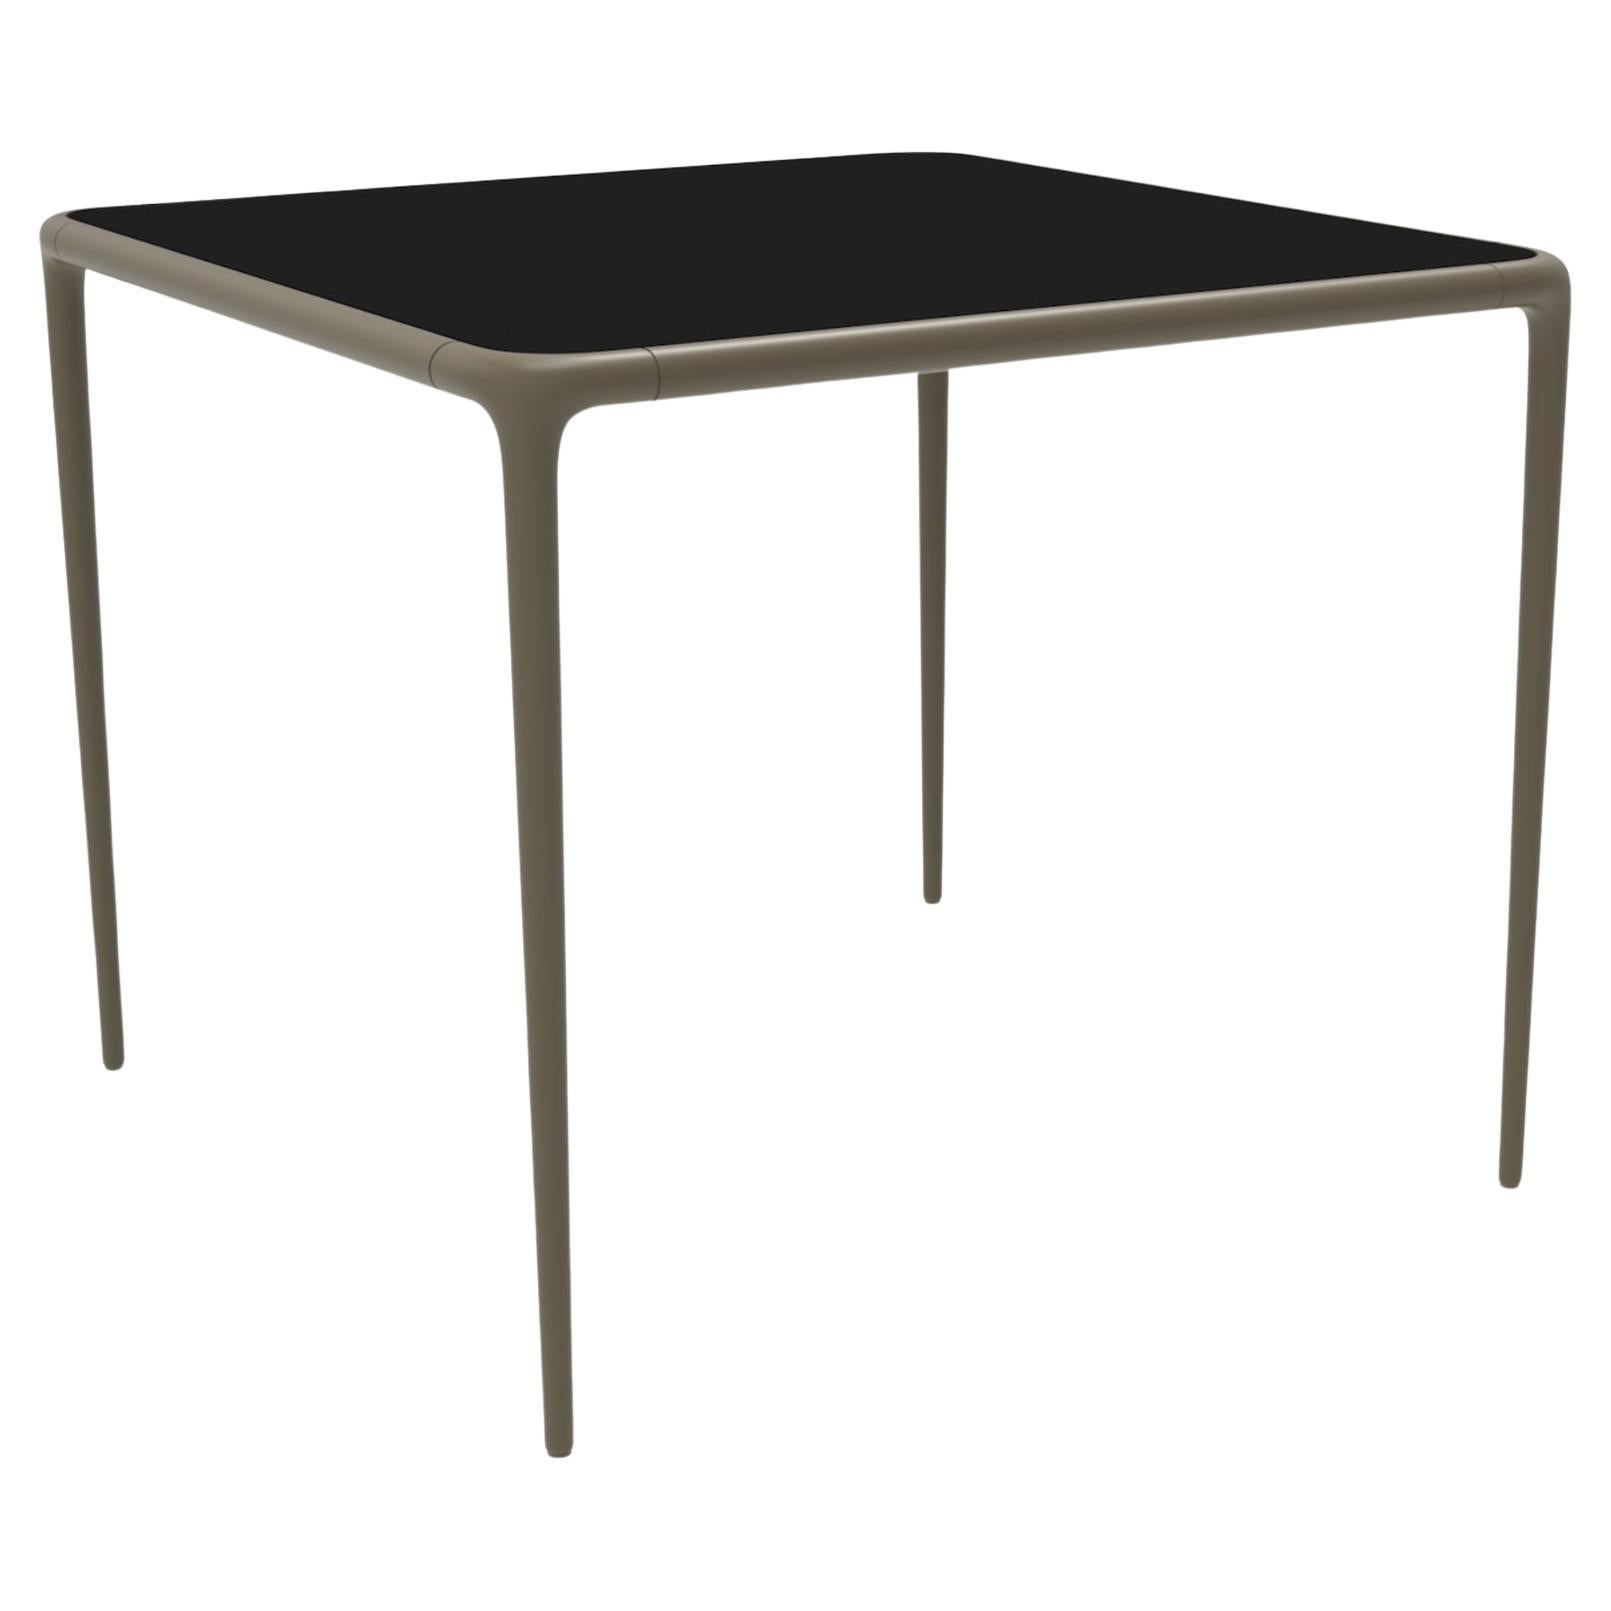 Xaloc Bronze Glass Top Table 90 by Mowee For Sale